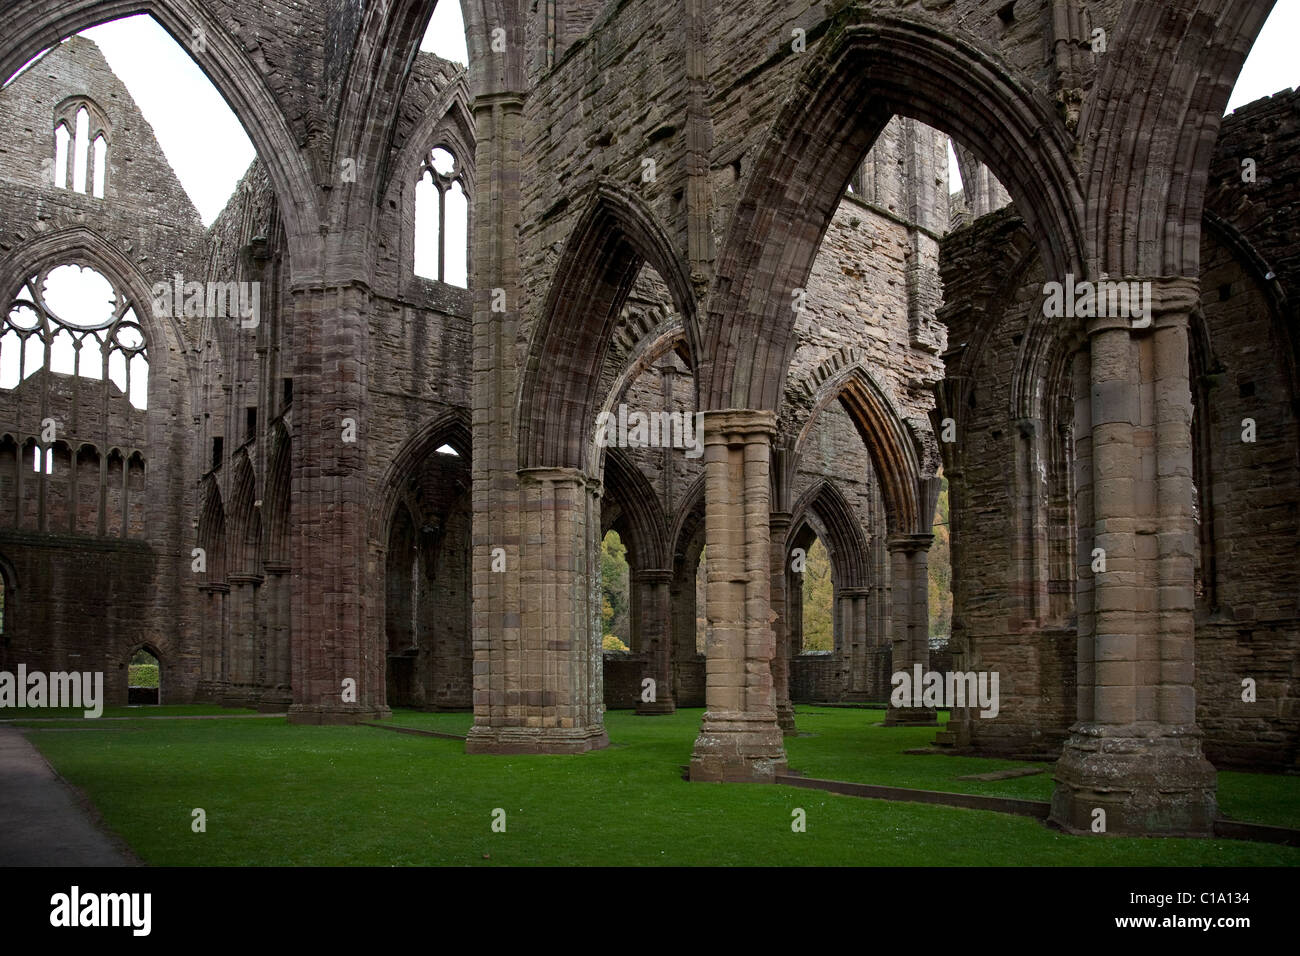 Ruins of Tintern Abbey in Tintern, Monmouthshire, Wales, UK Stock Photo